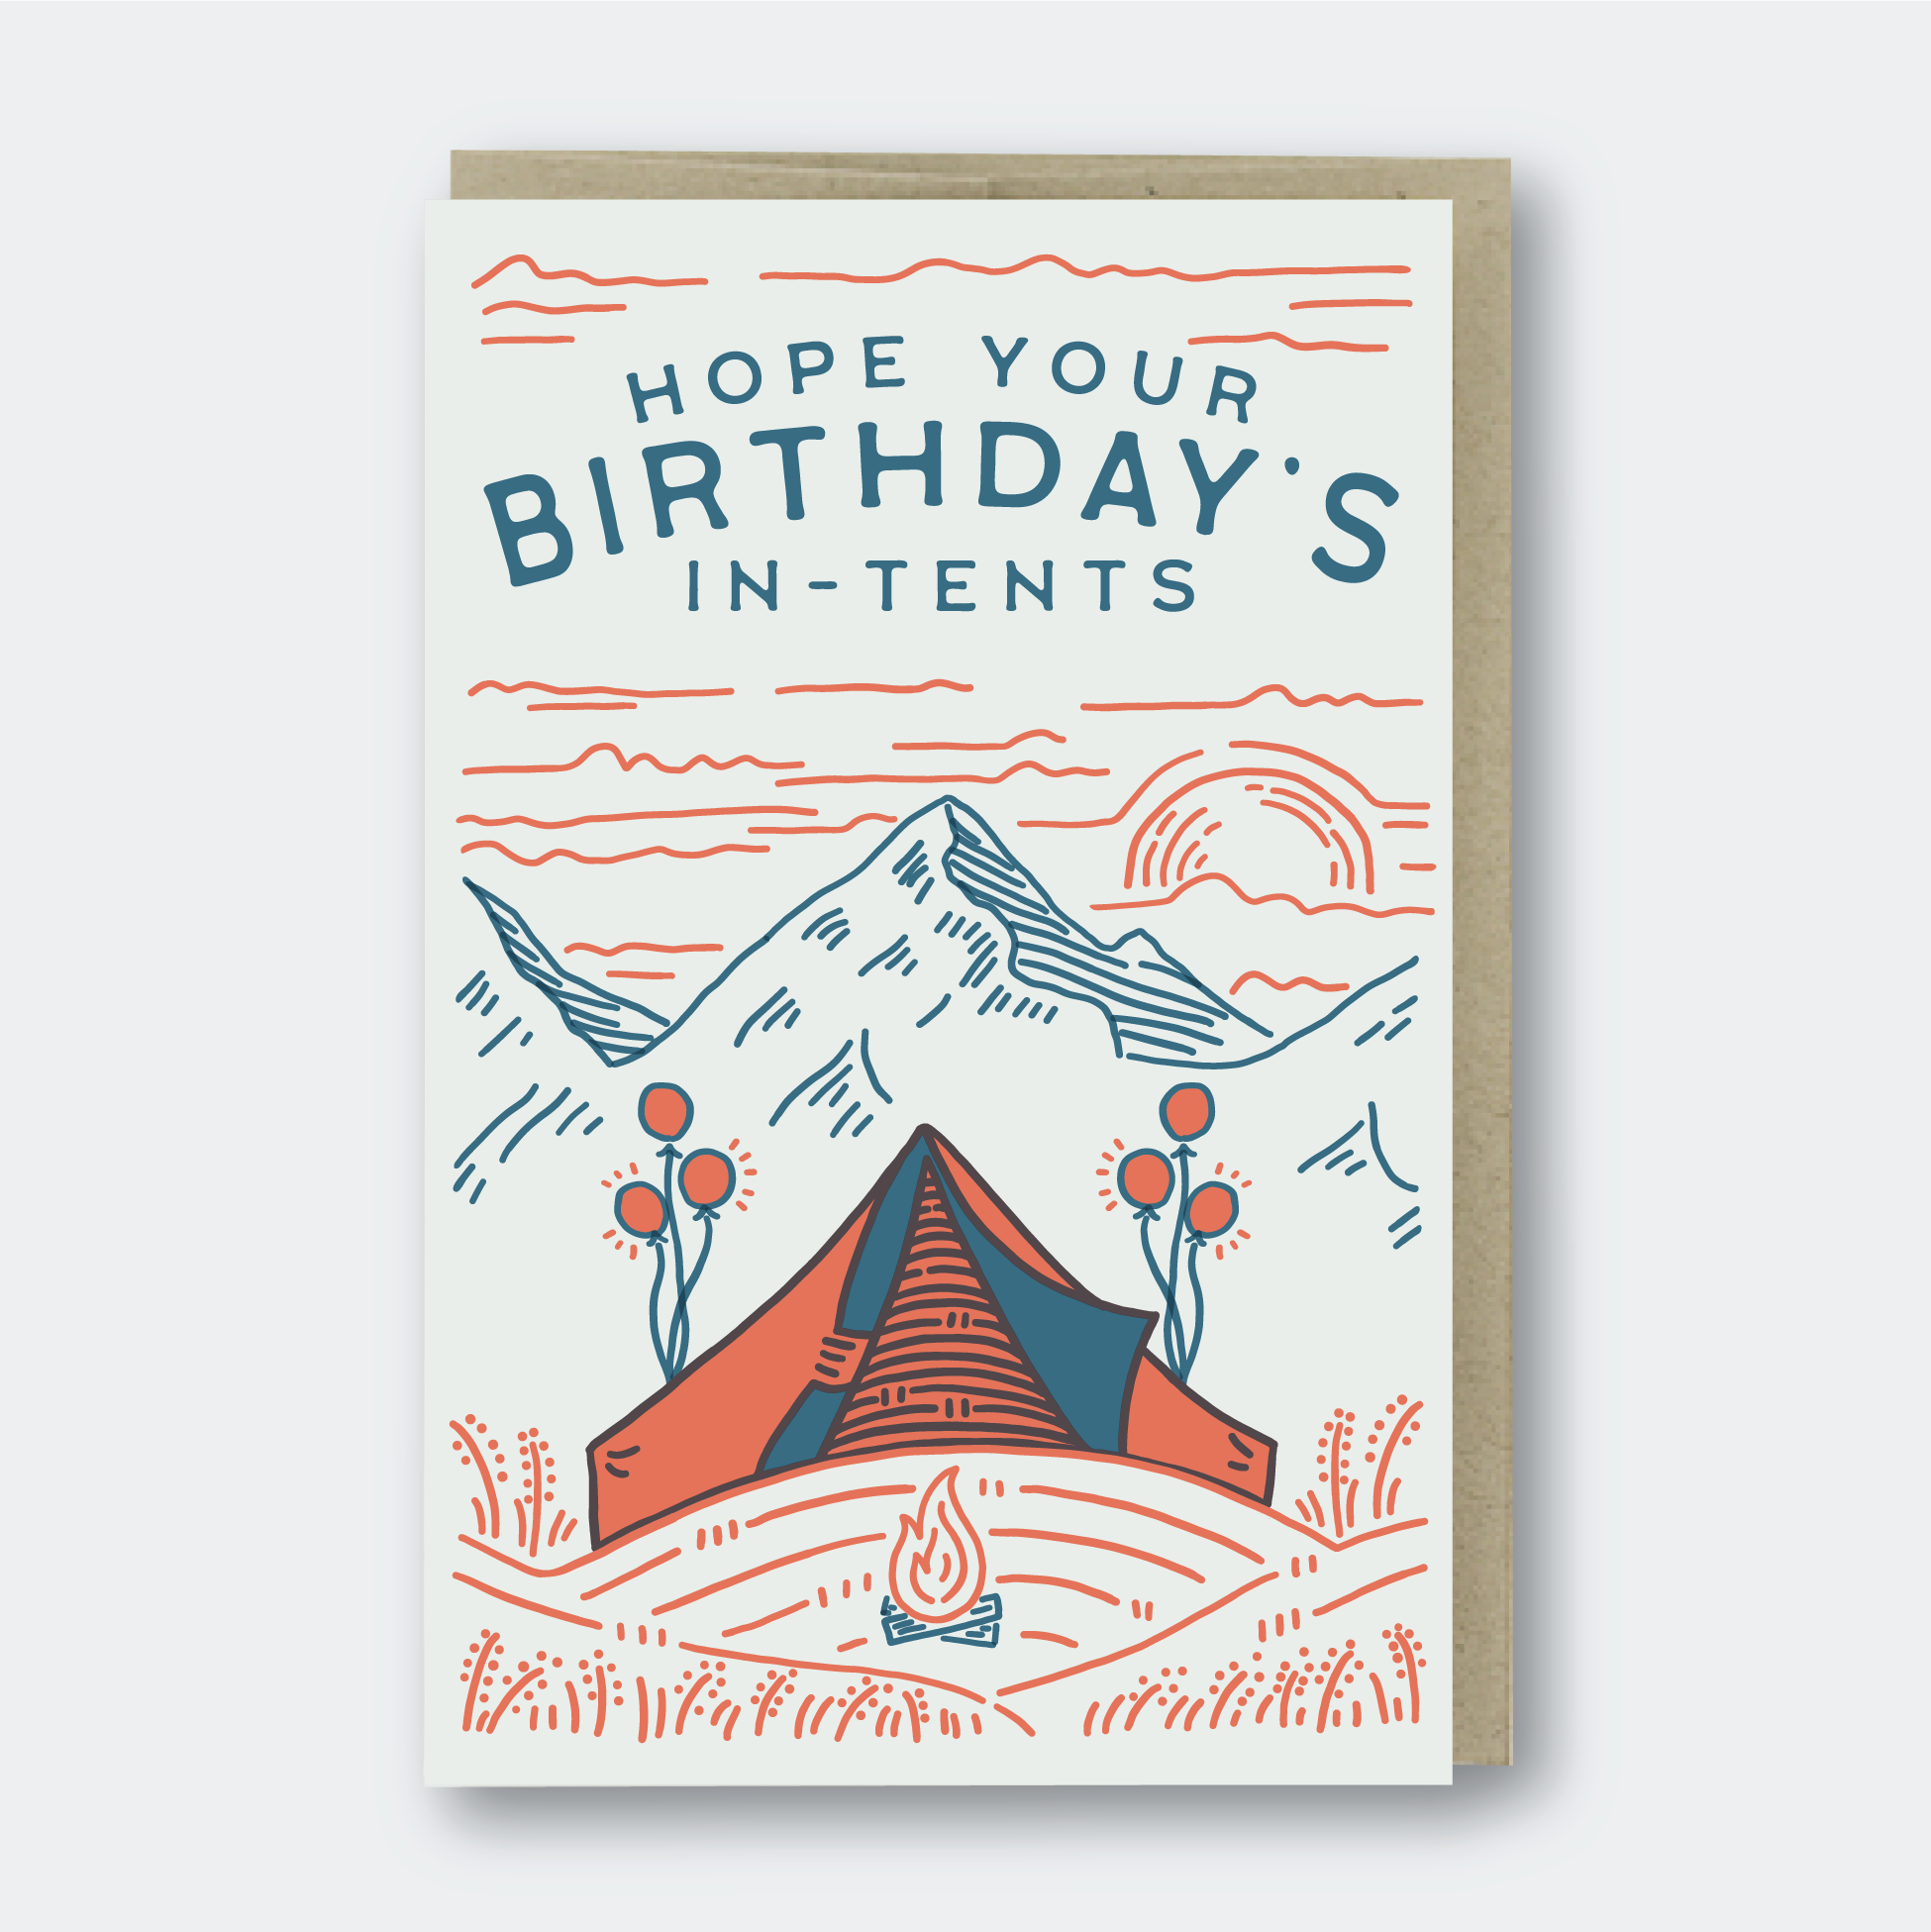 In-Tents Birthday